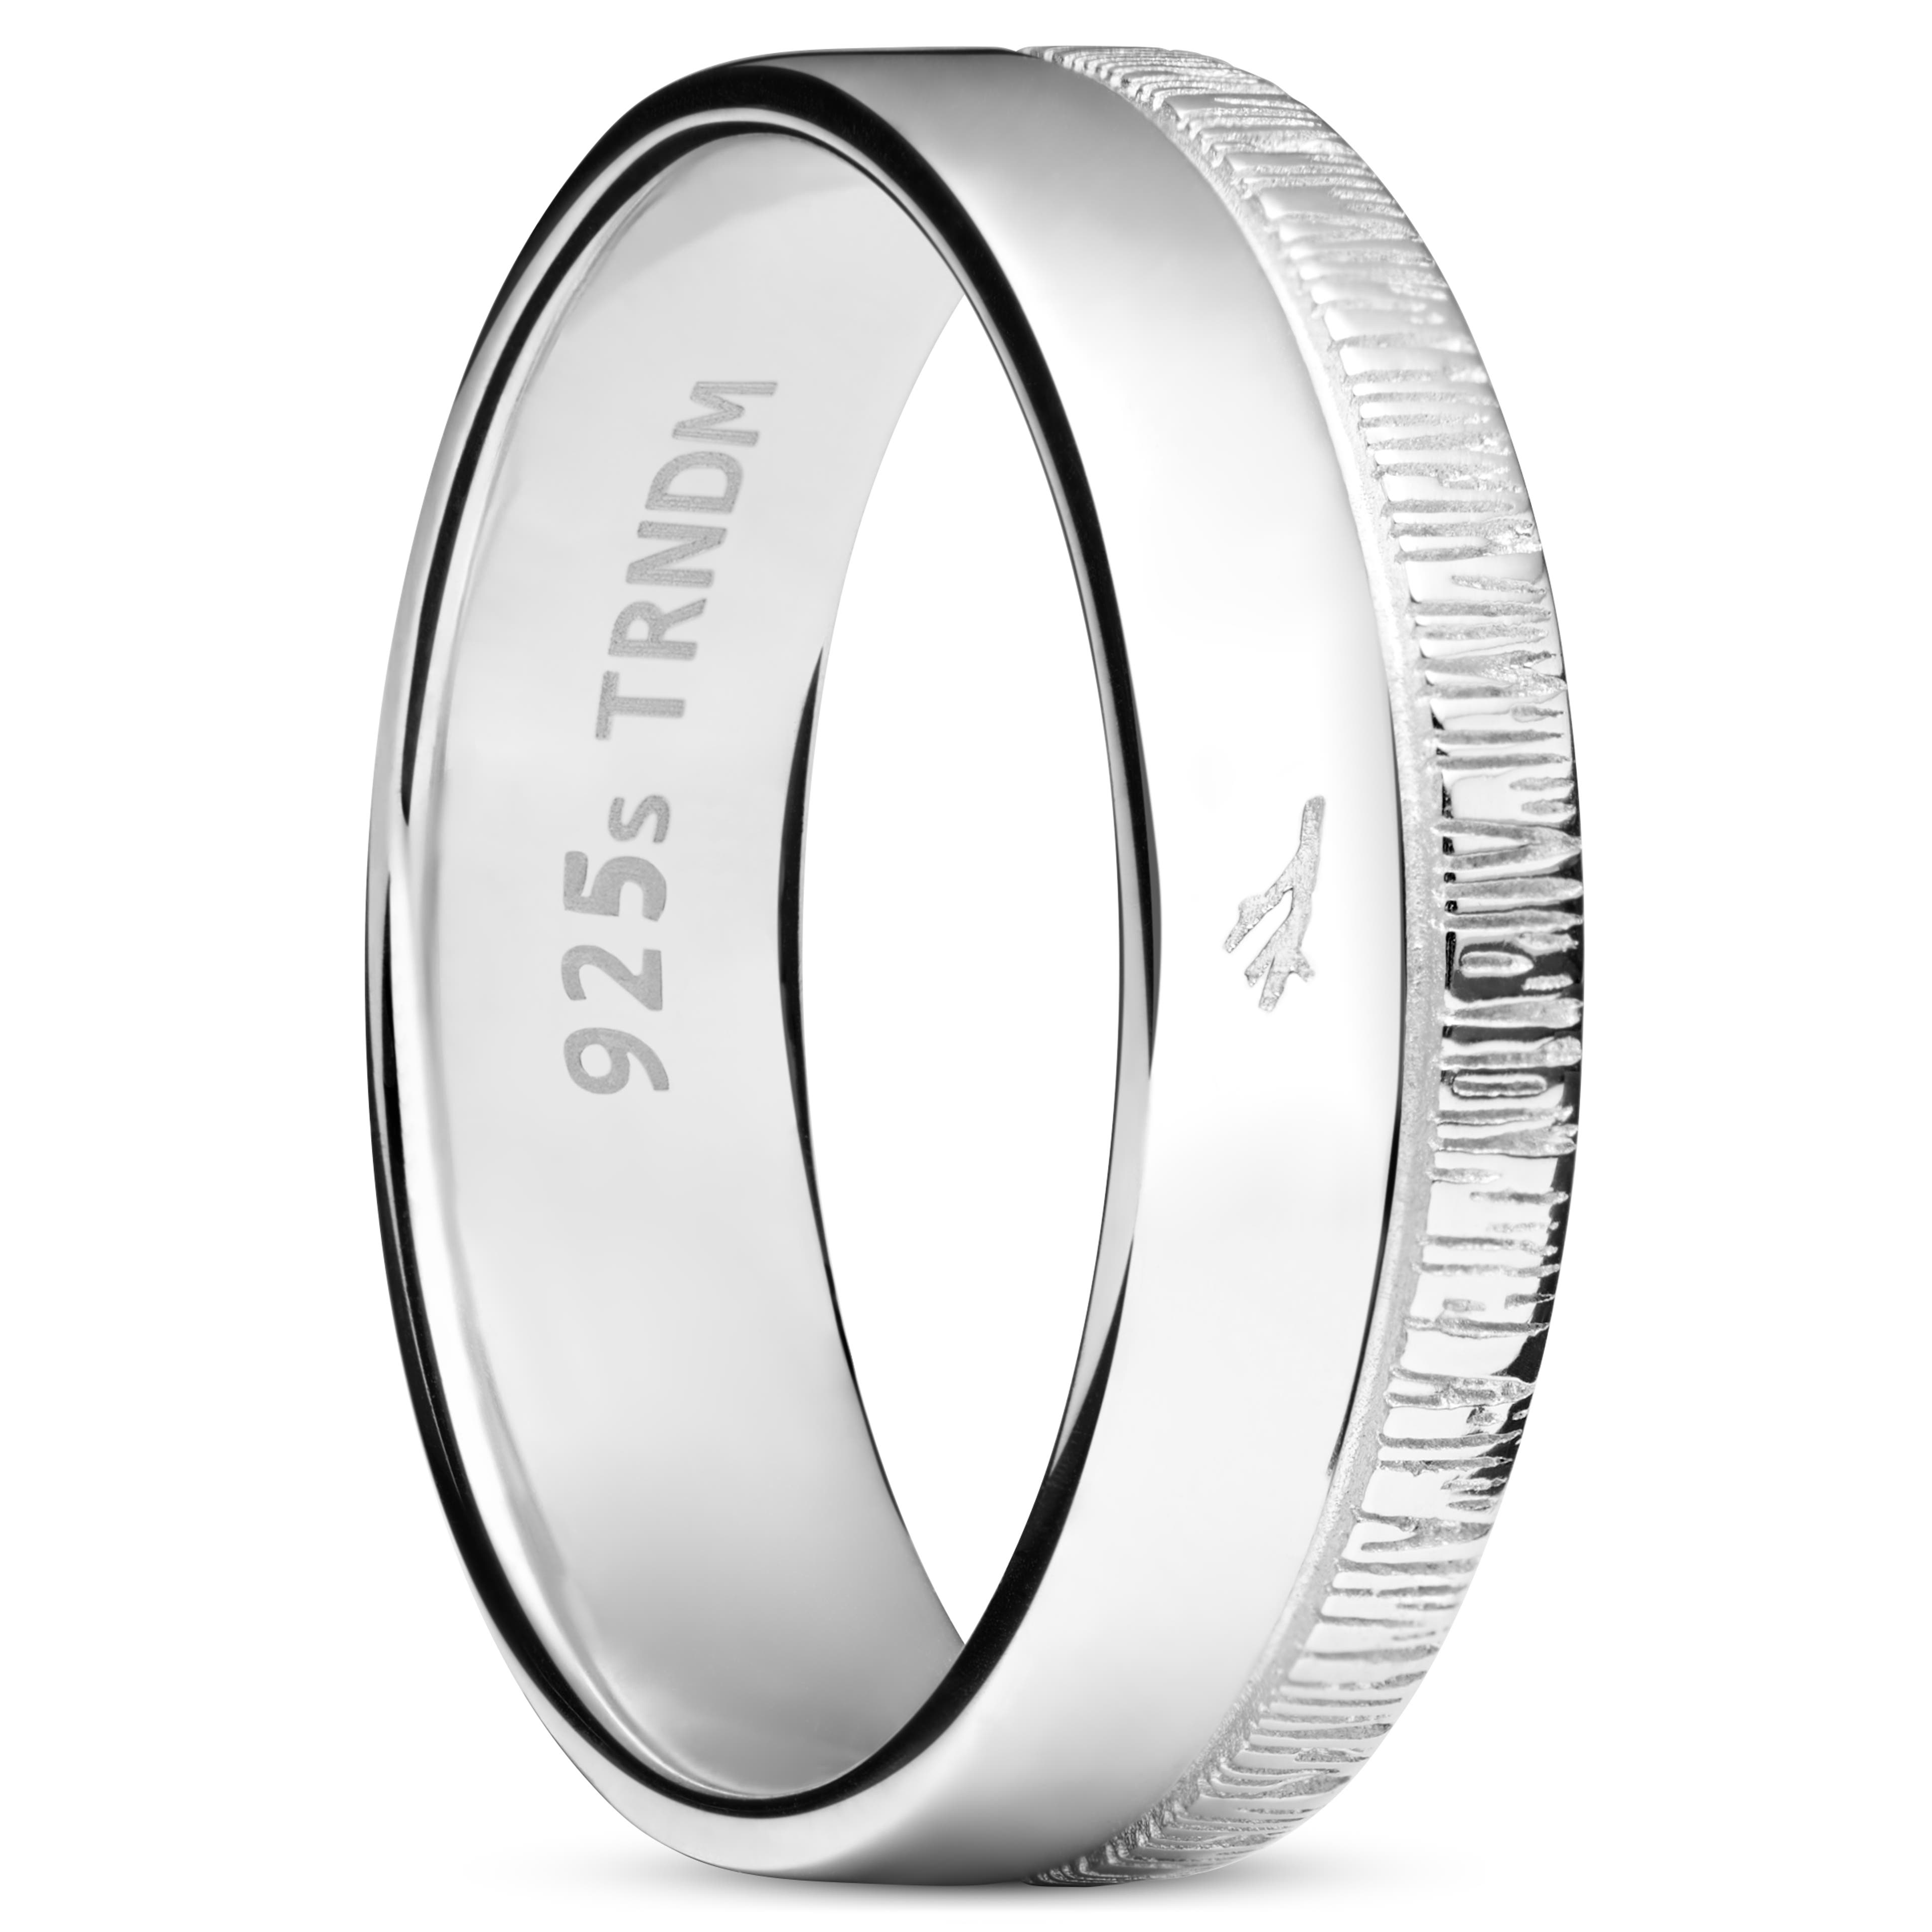 Adrian | 6 mm 925 Sterling Silver With Polished & Bark Texture Ring